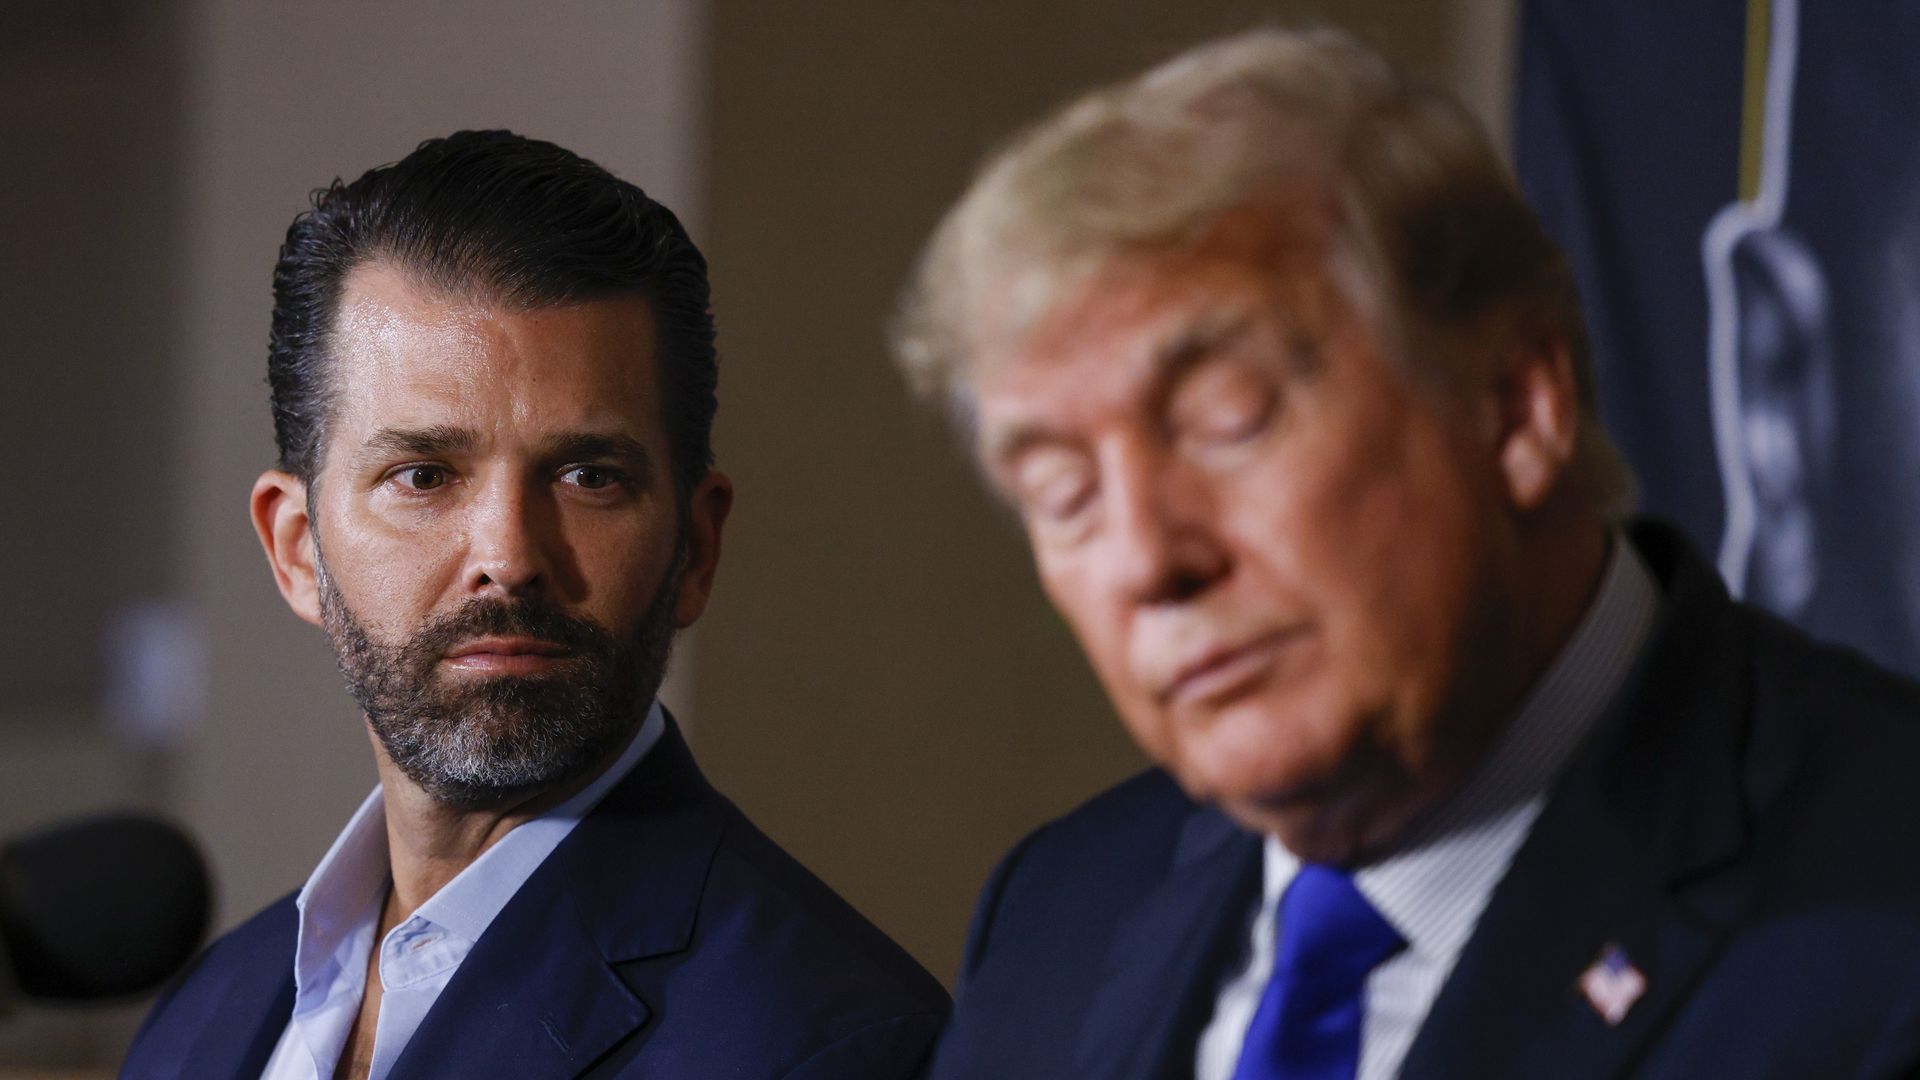 Photo of Donald Trump Jr looking to Donald Trump on his left